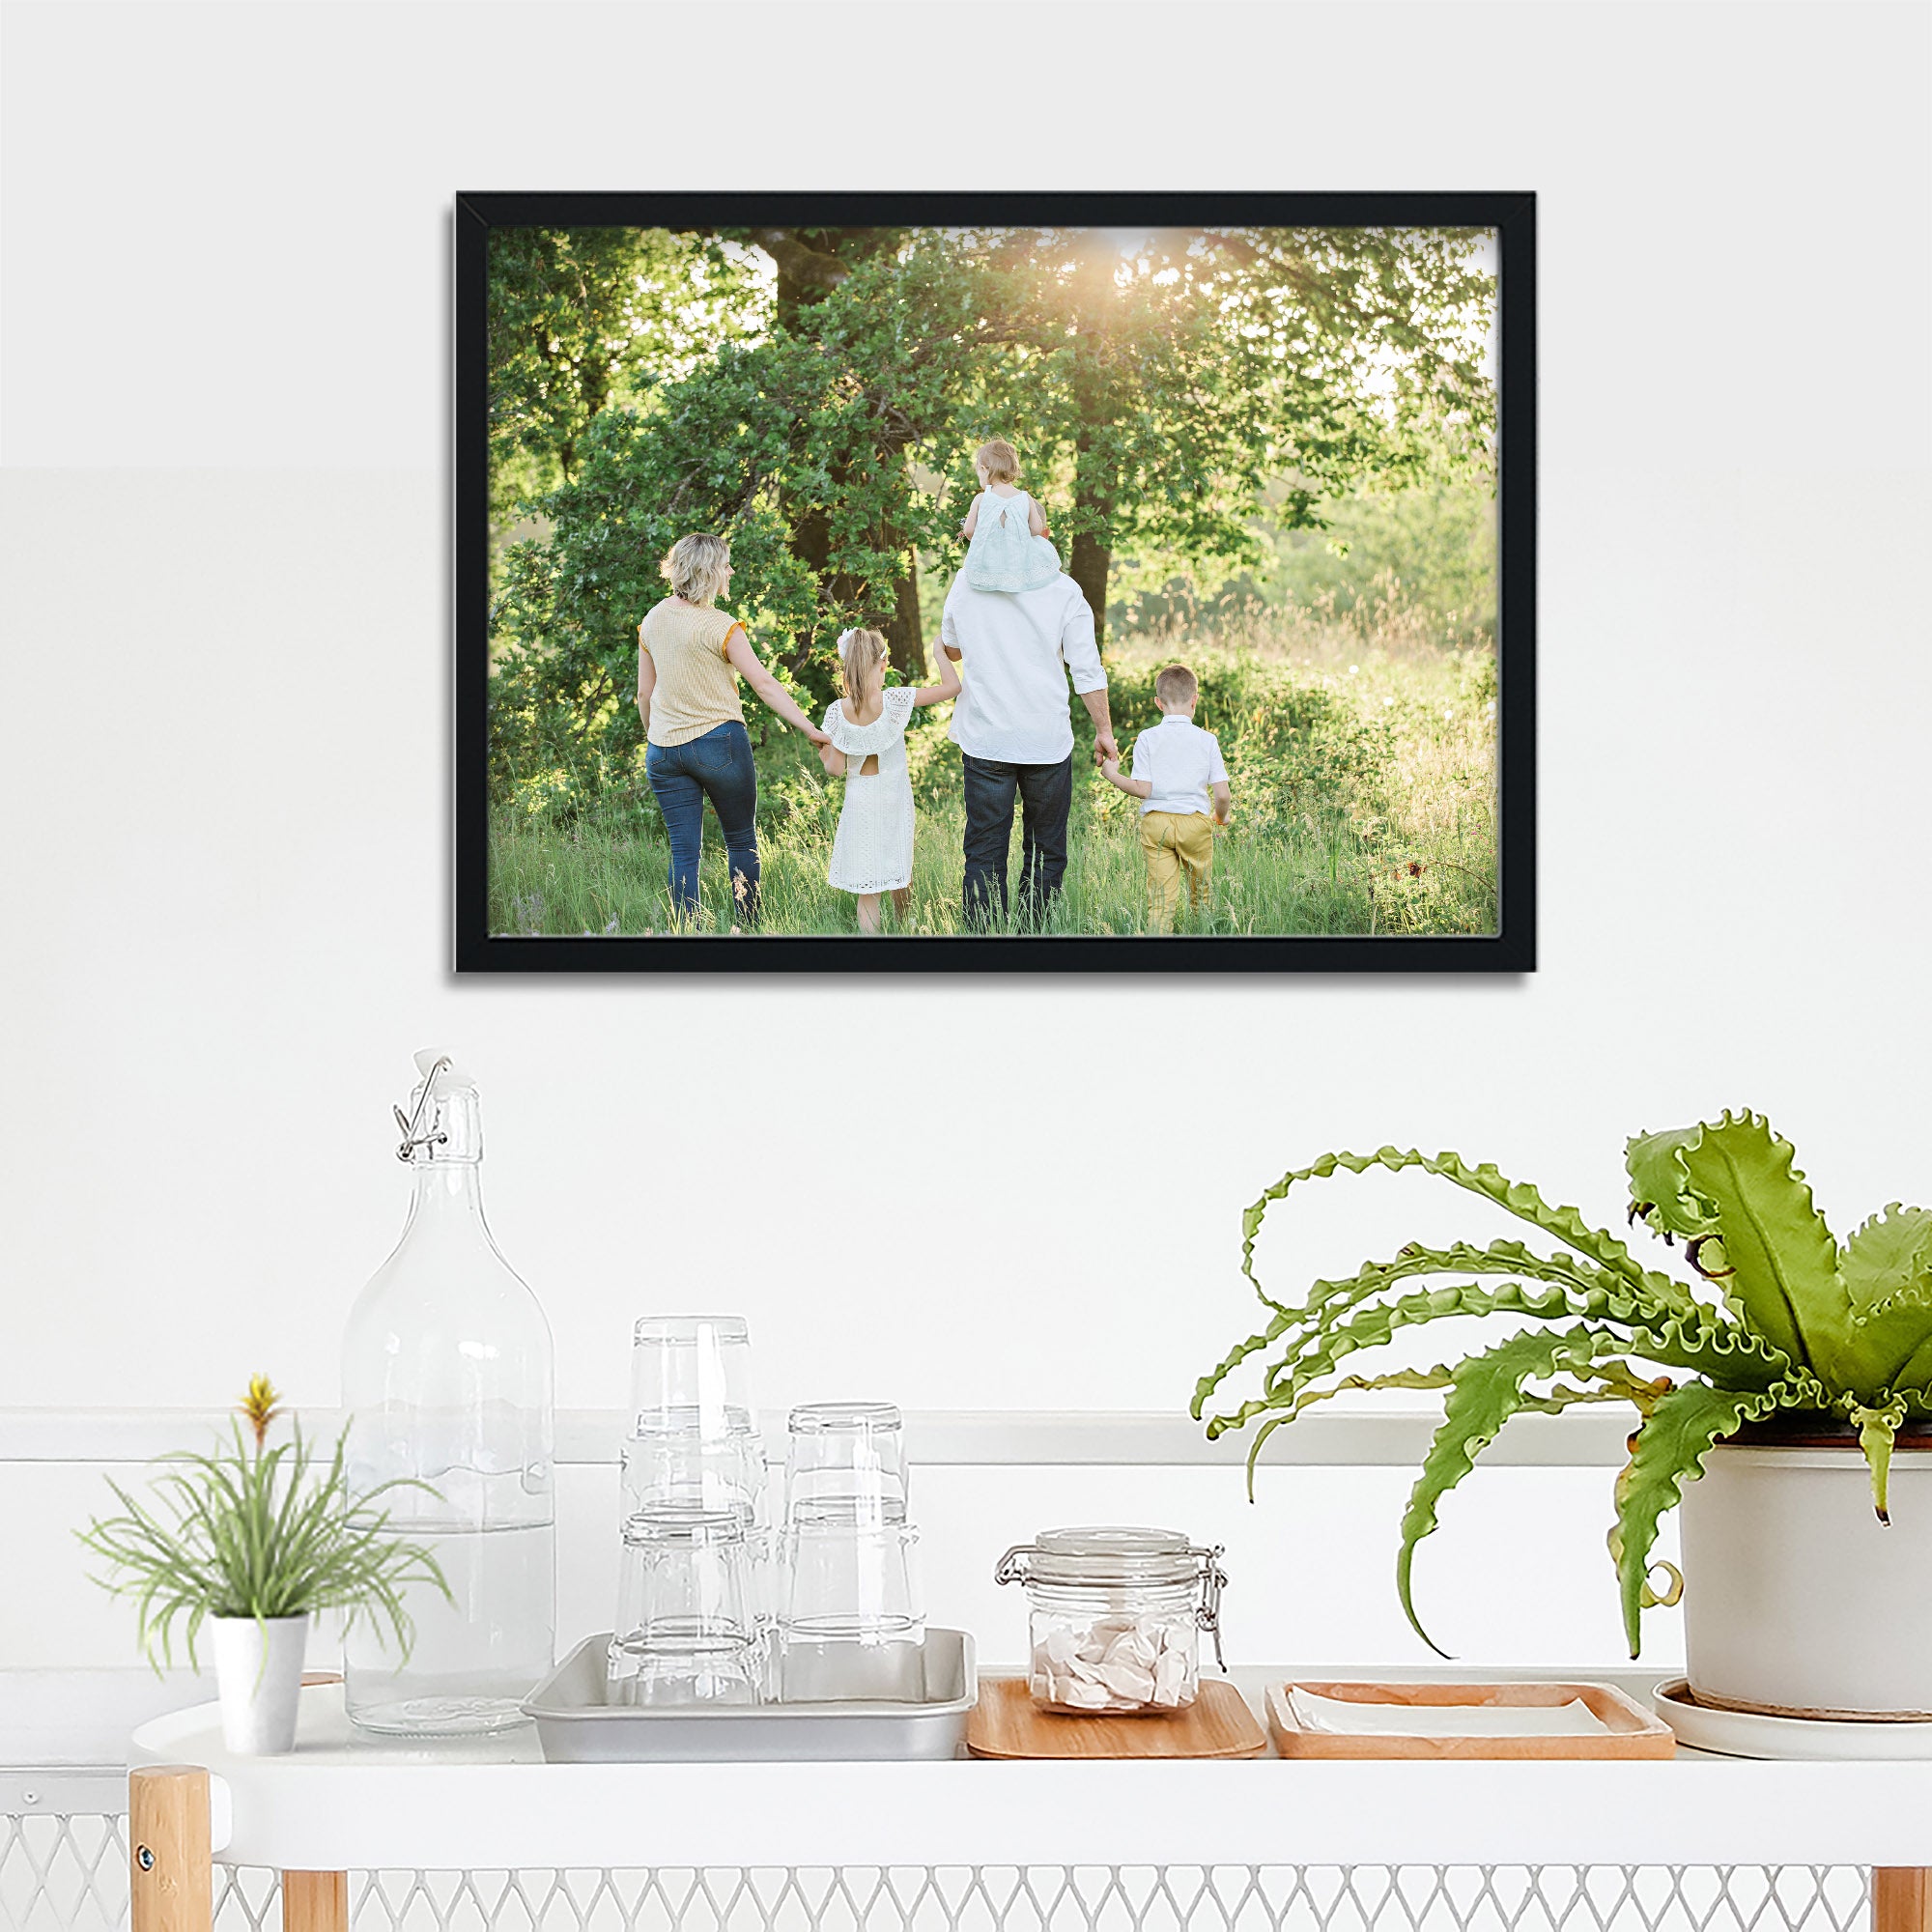 24" x 17" MightyPrint Wall Art - Upload Your Image